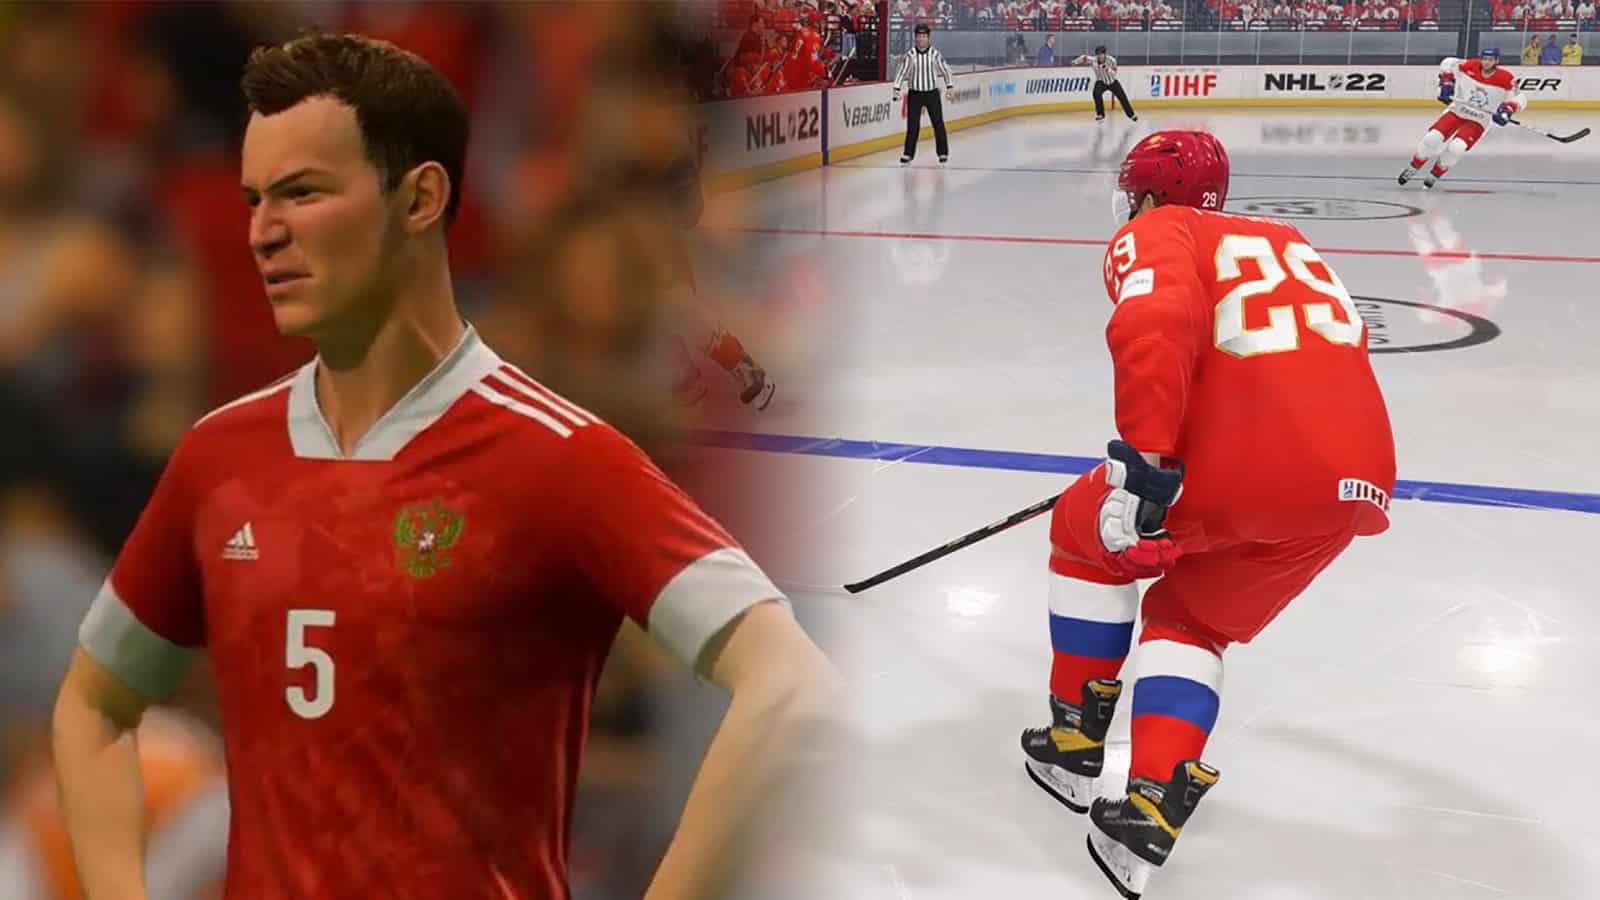 Russia players in NHL and FIFA